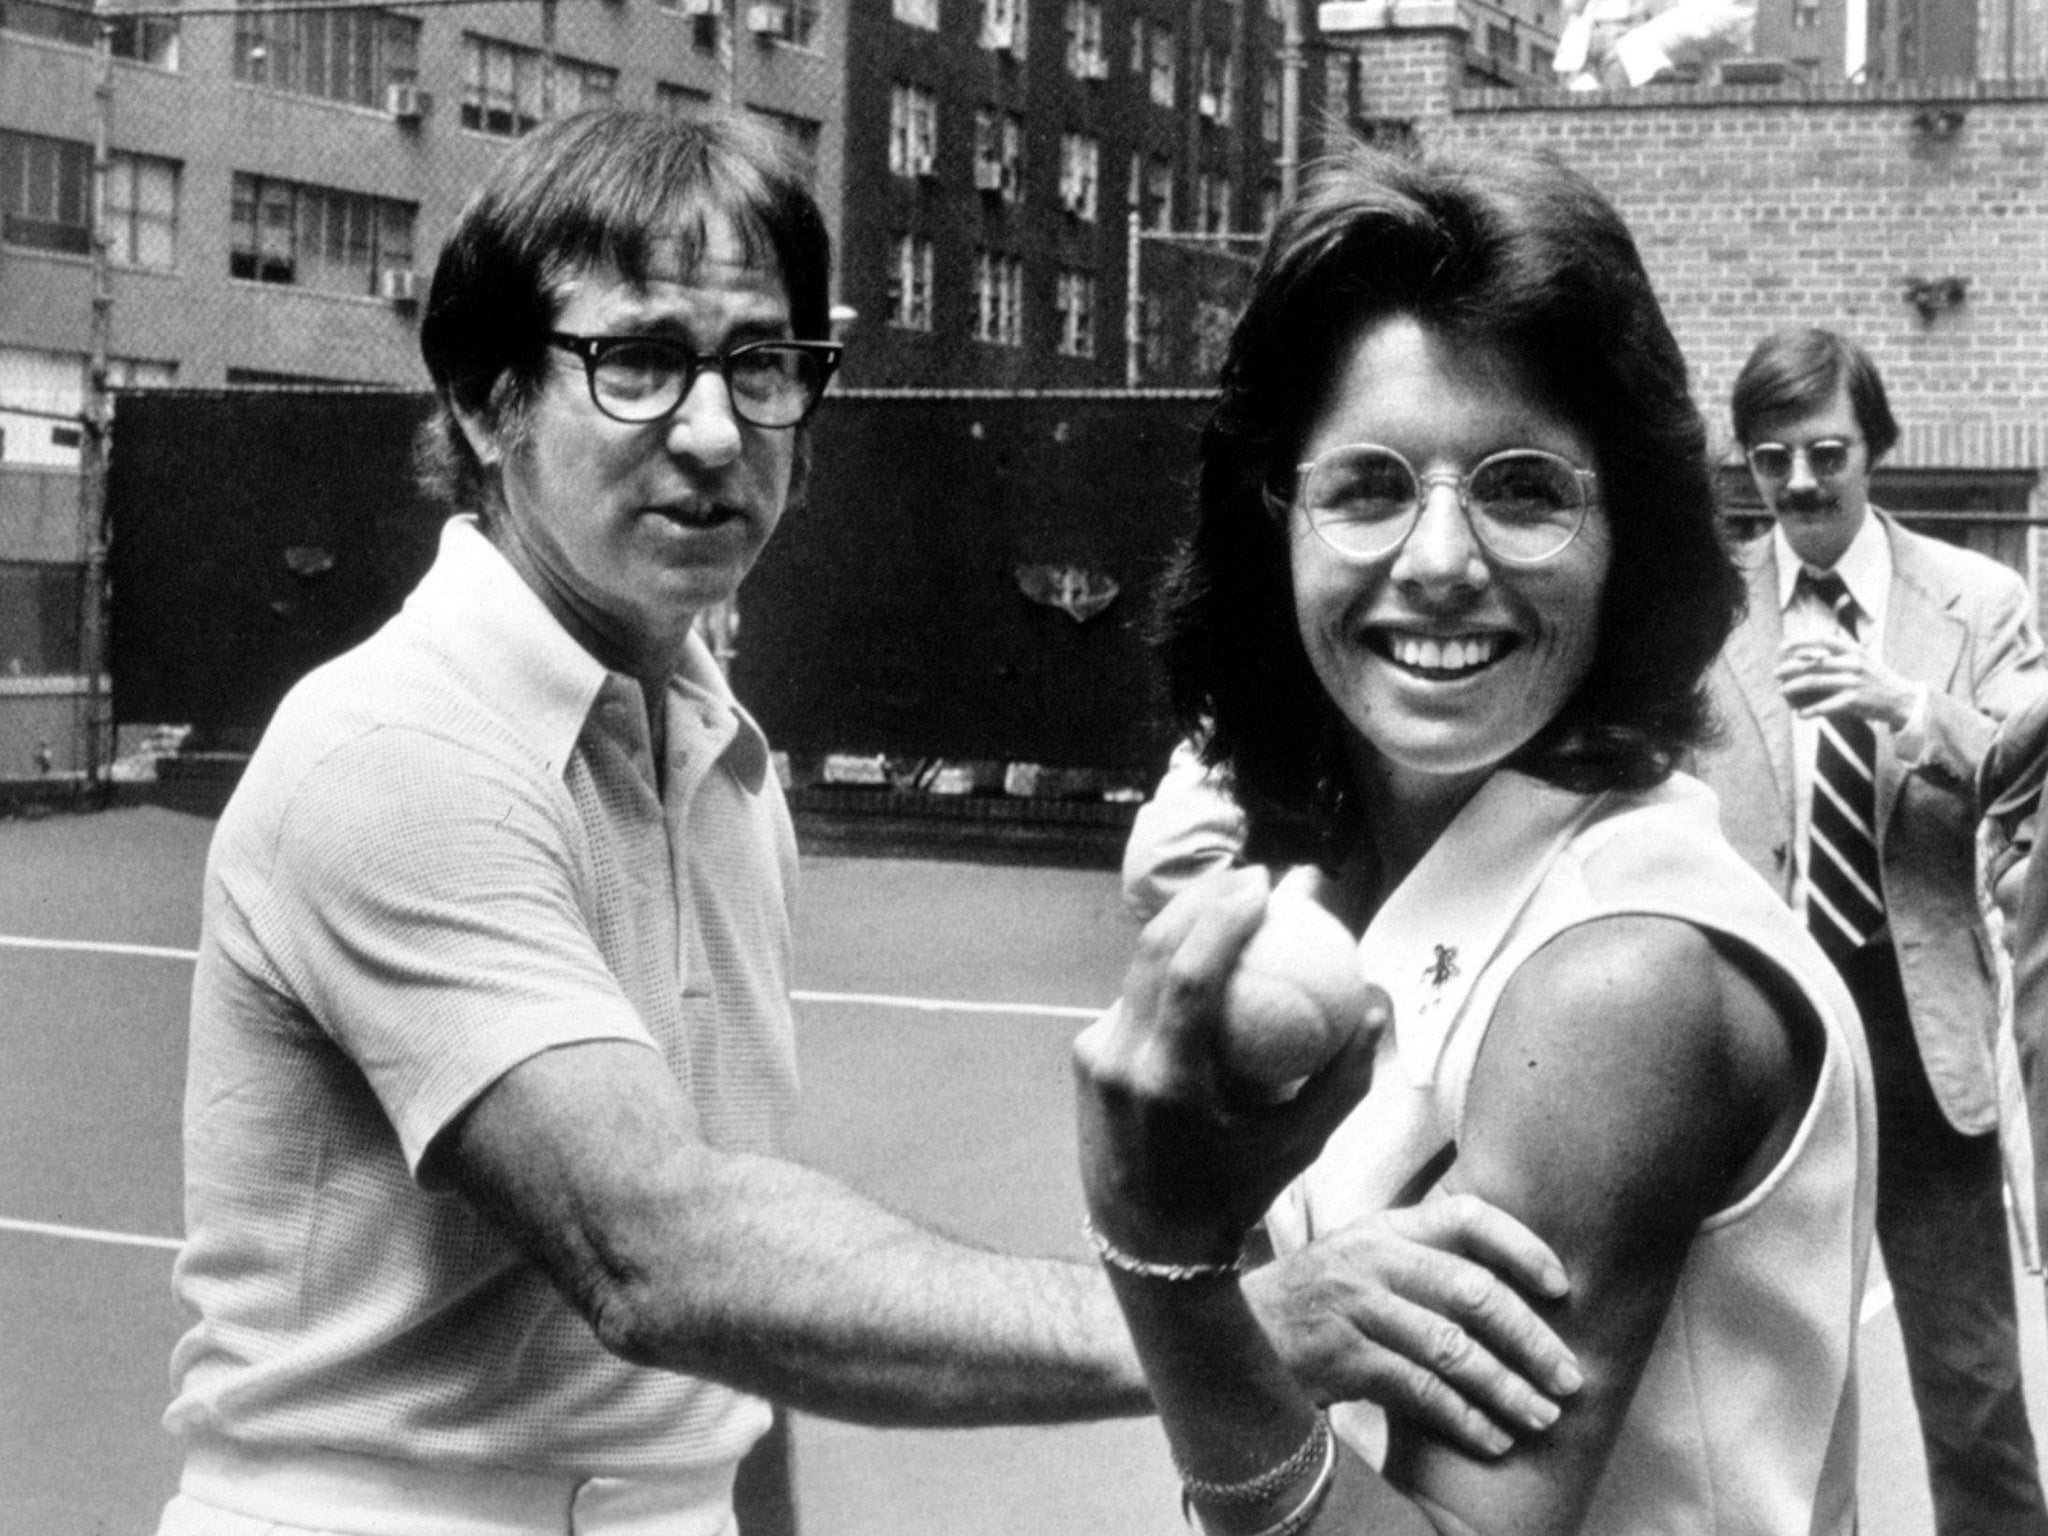 Billie Jean King and Bobby Riggs in 1973